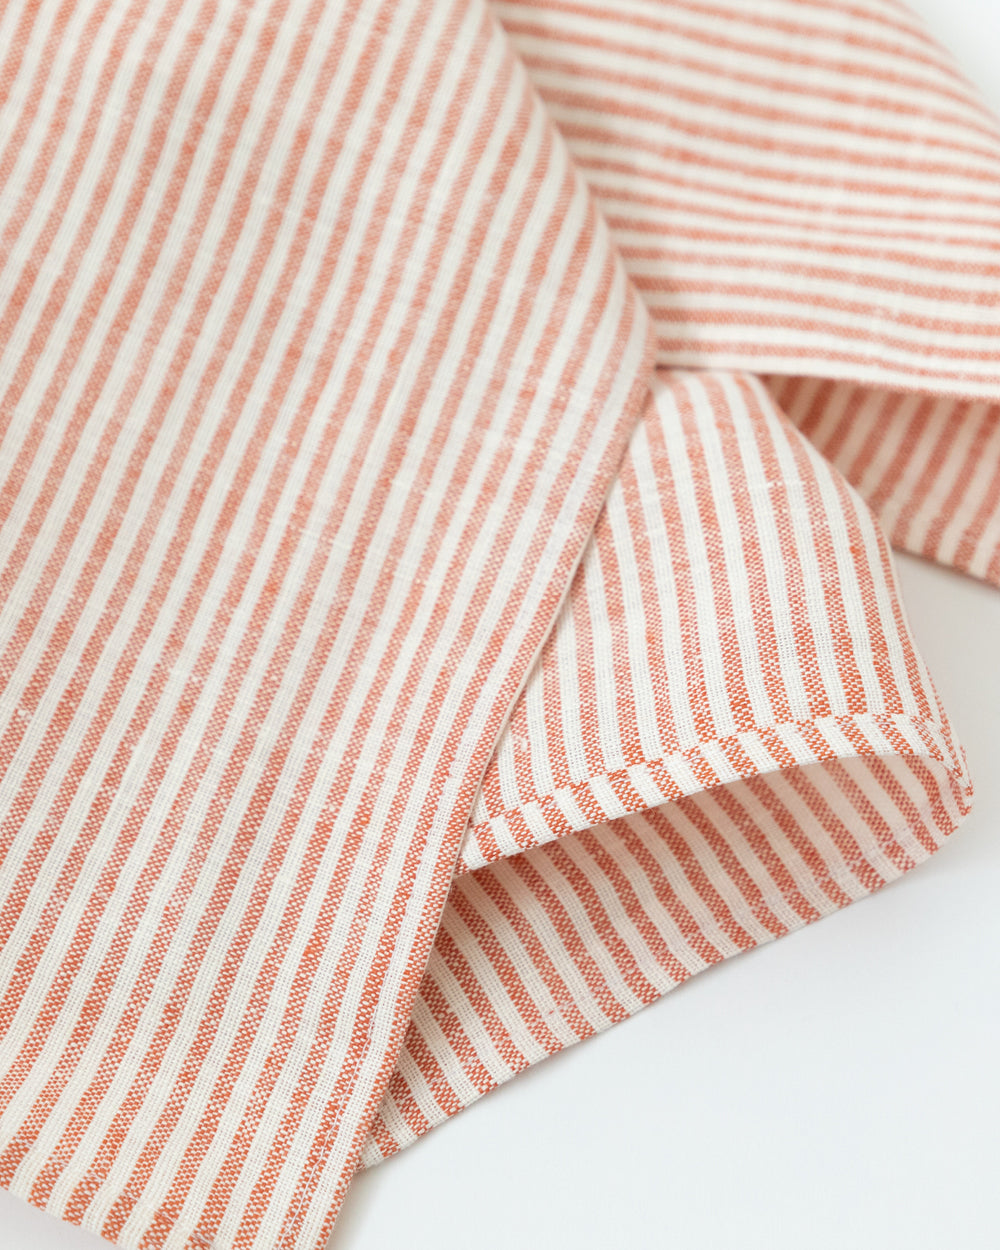 Detailed close up of a striped linen tea towel is a beautiful mix of cream and vermillion red